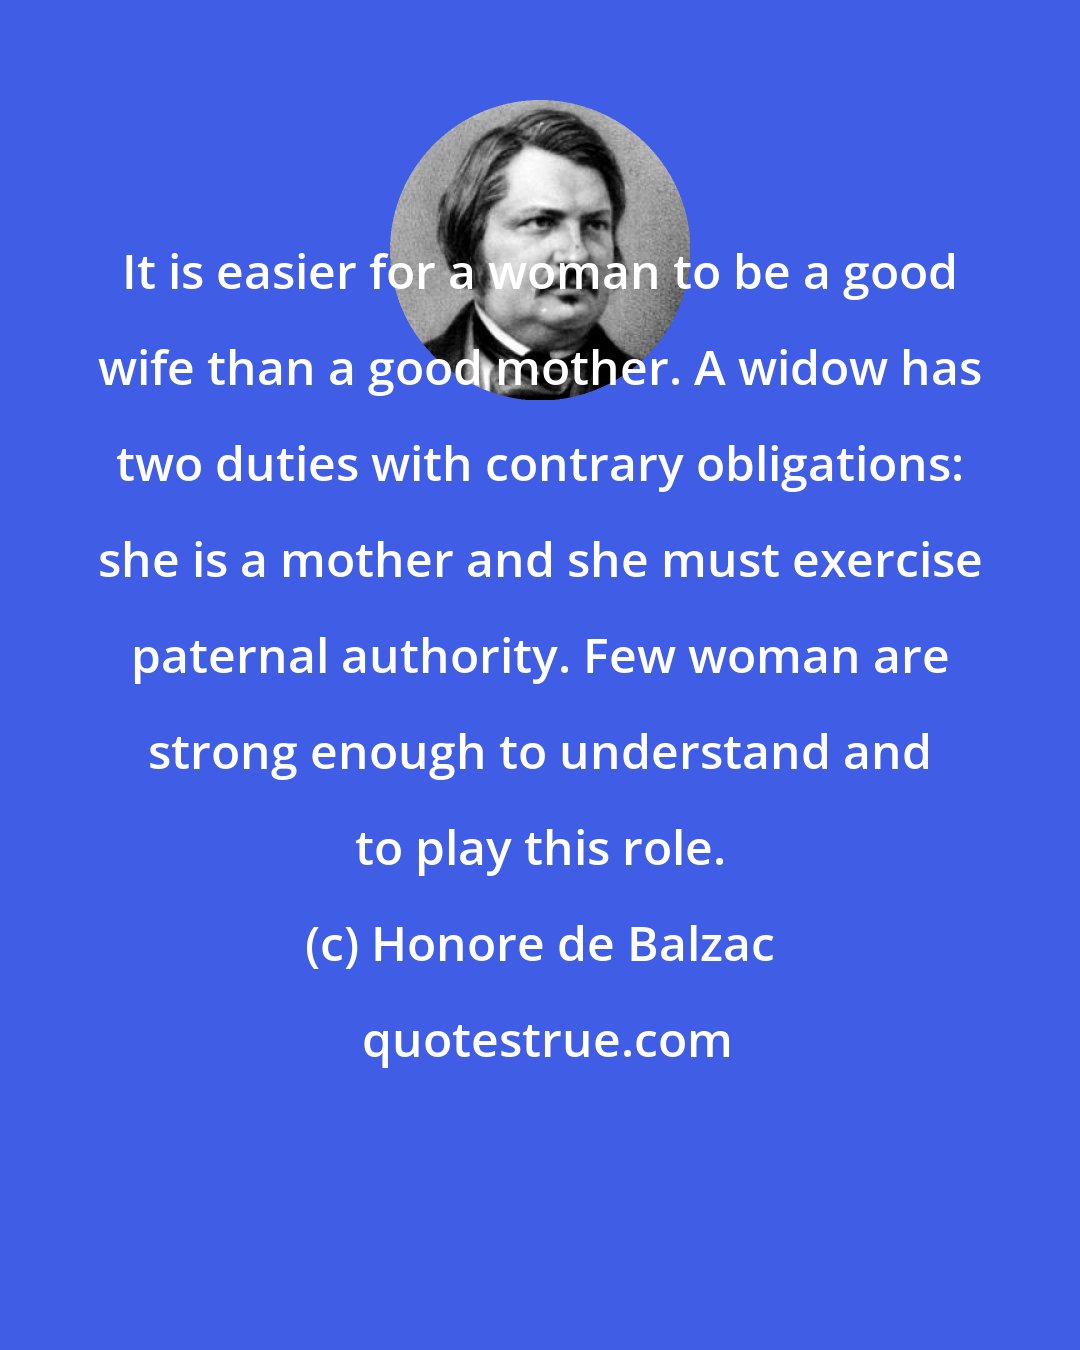 Honore de Balzac: It is easier for a woman to be a good wife than a good mother. A widow has two duties with contrary obligations: she is a mother and she must exercise paternal authority. Few woman are strong enough to understand and to play this role.